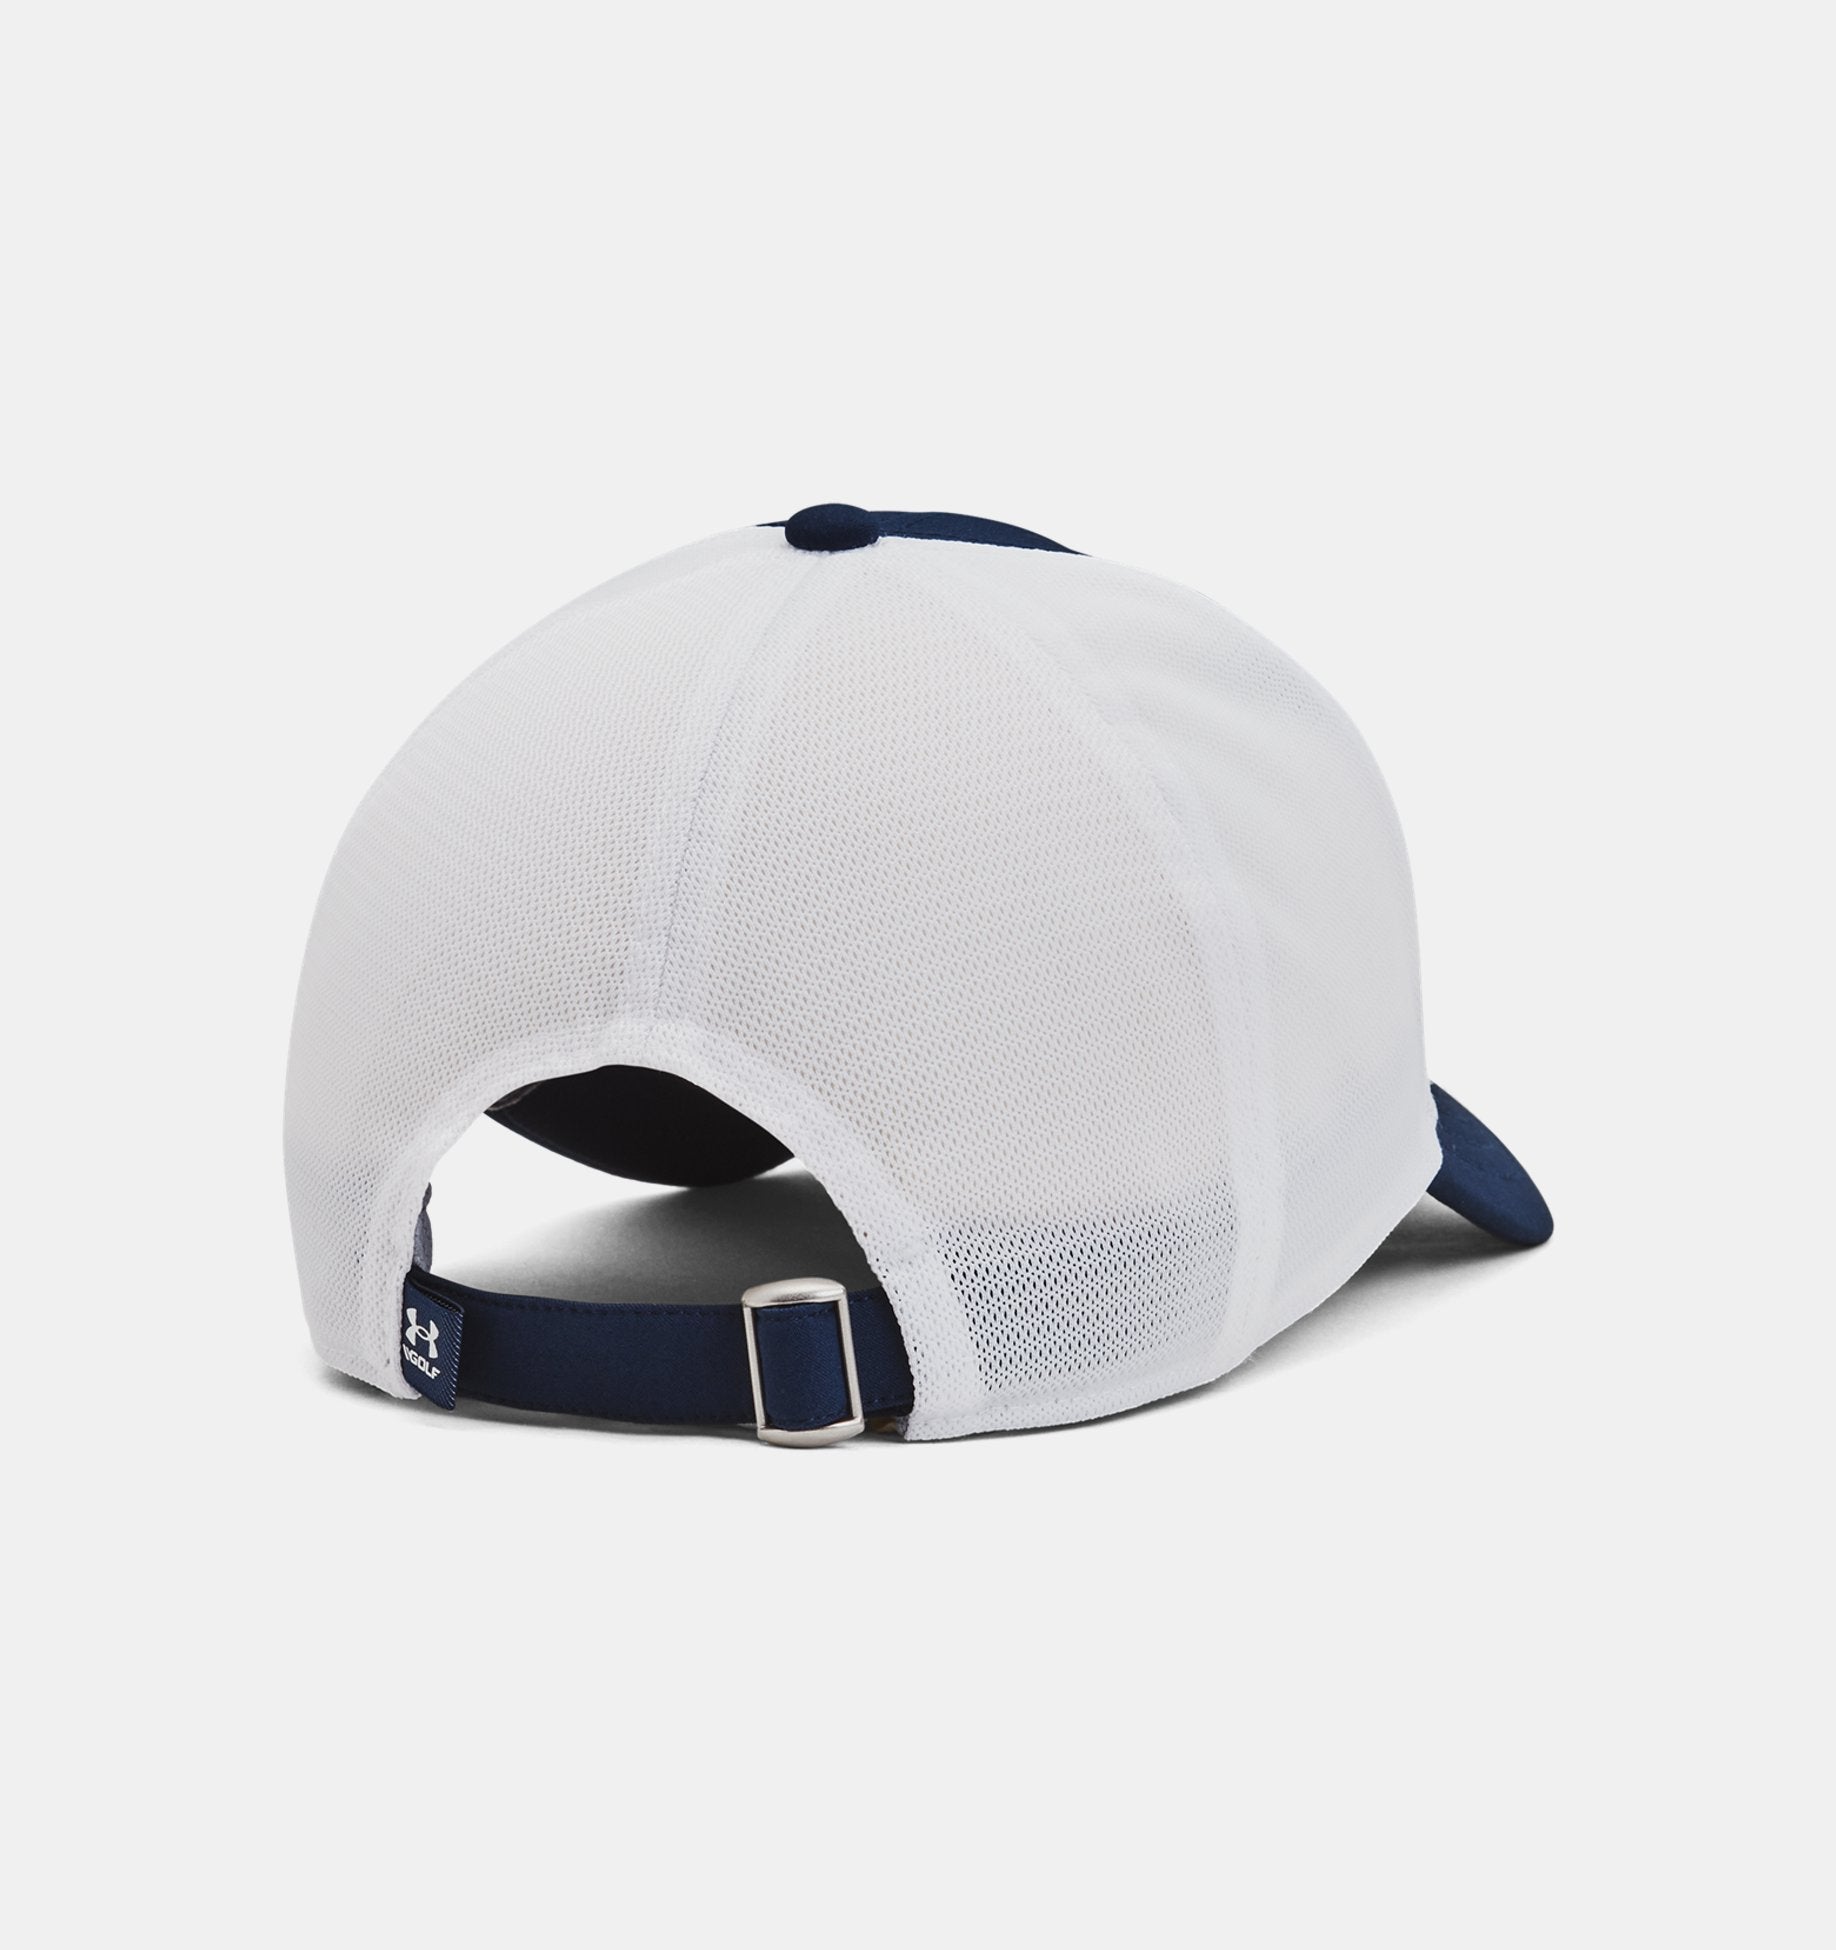 Caps Under Armour Iso-Chill Driver Mesh Adjustable Cap Pitch Gray/ Black